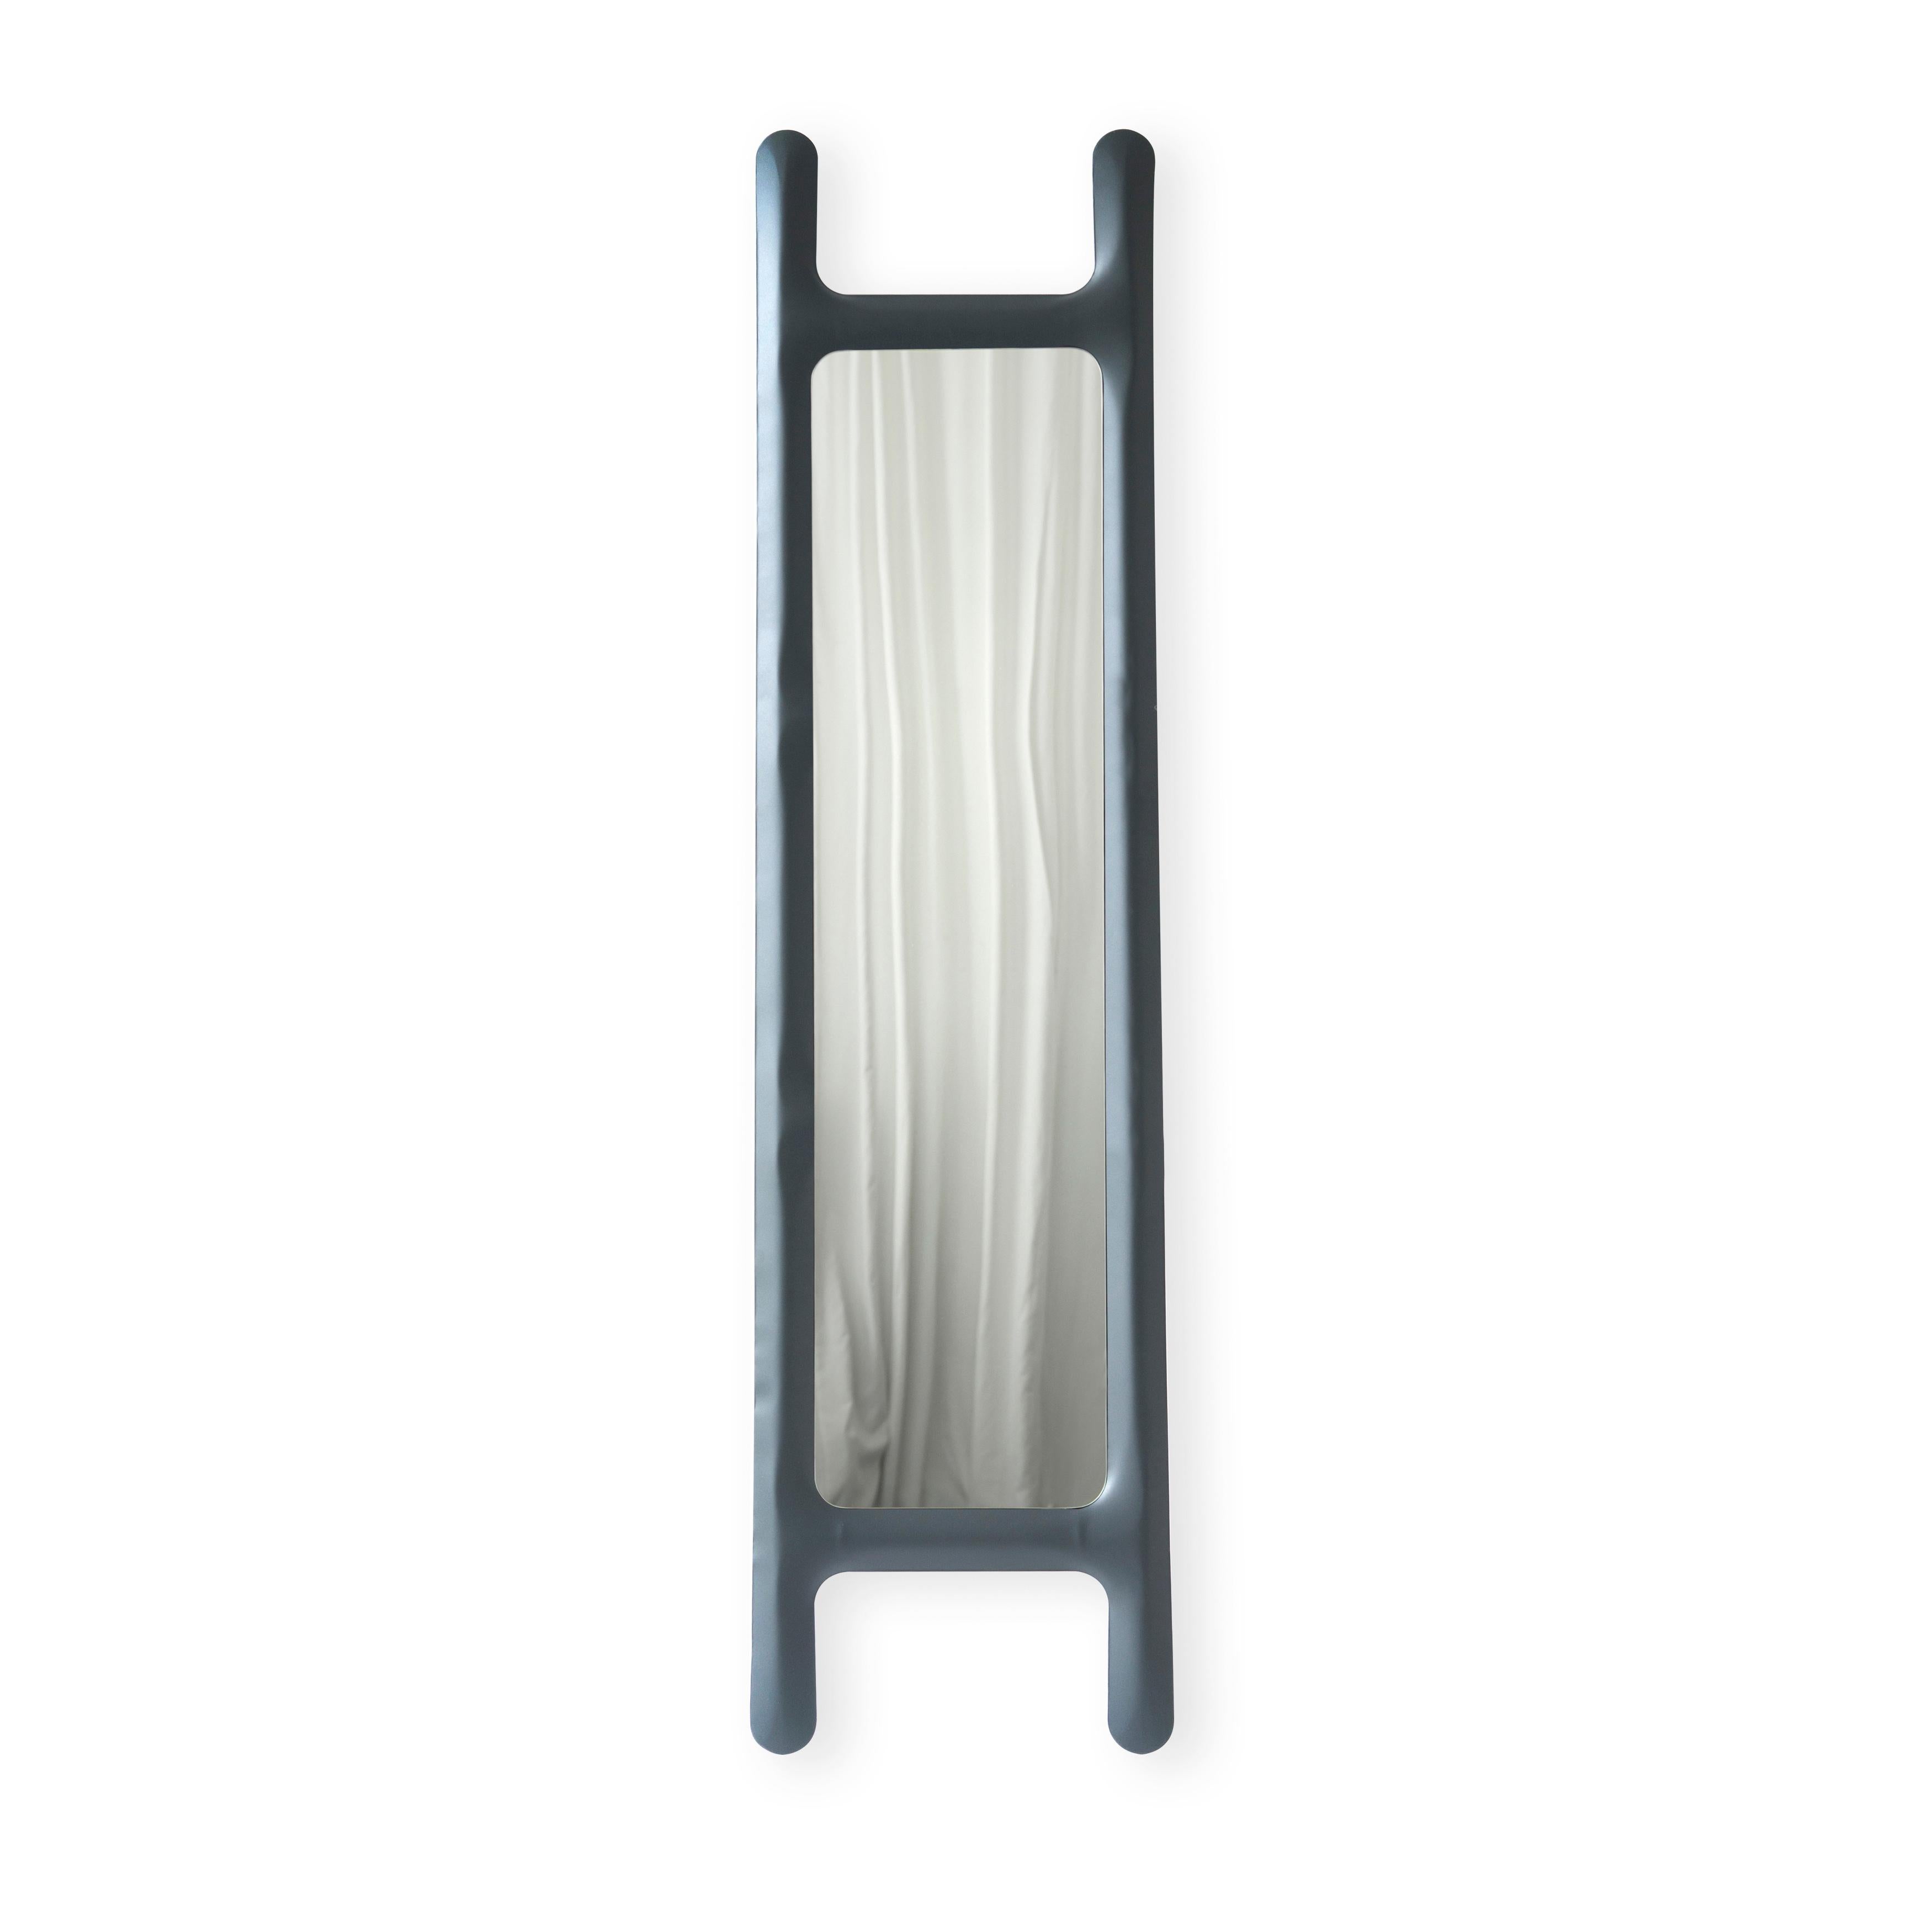 Graphite drab sculptural wall mirror by Zieta
Dimensions: D 6 x W 46 x H 188 cm 
Material: Mirror, carbon steel. 
Finish: Powder-coated in graphite grey matt.
Also available in colors: stainless steel, or powder-coated. 


A DRAB mirror is an